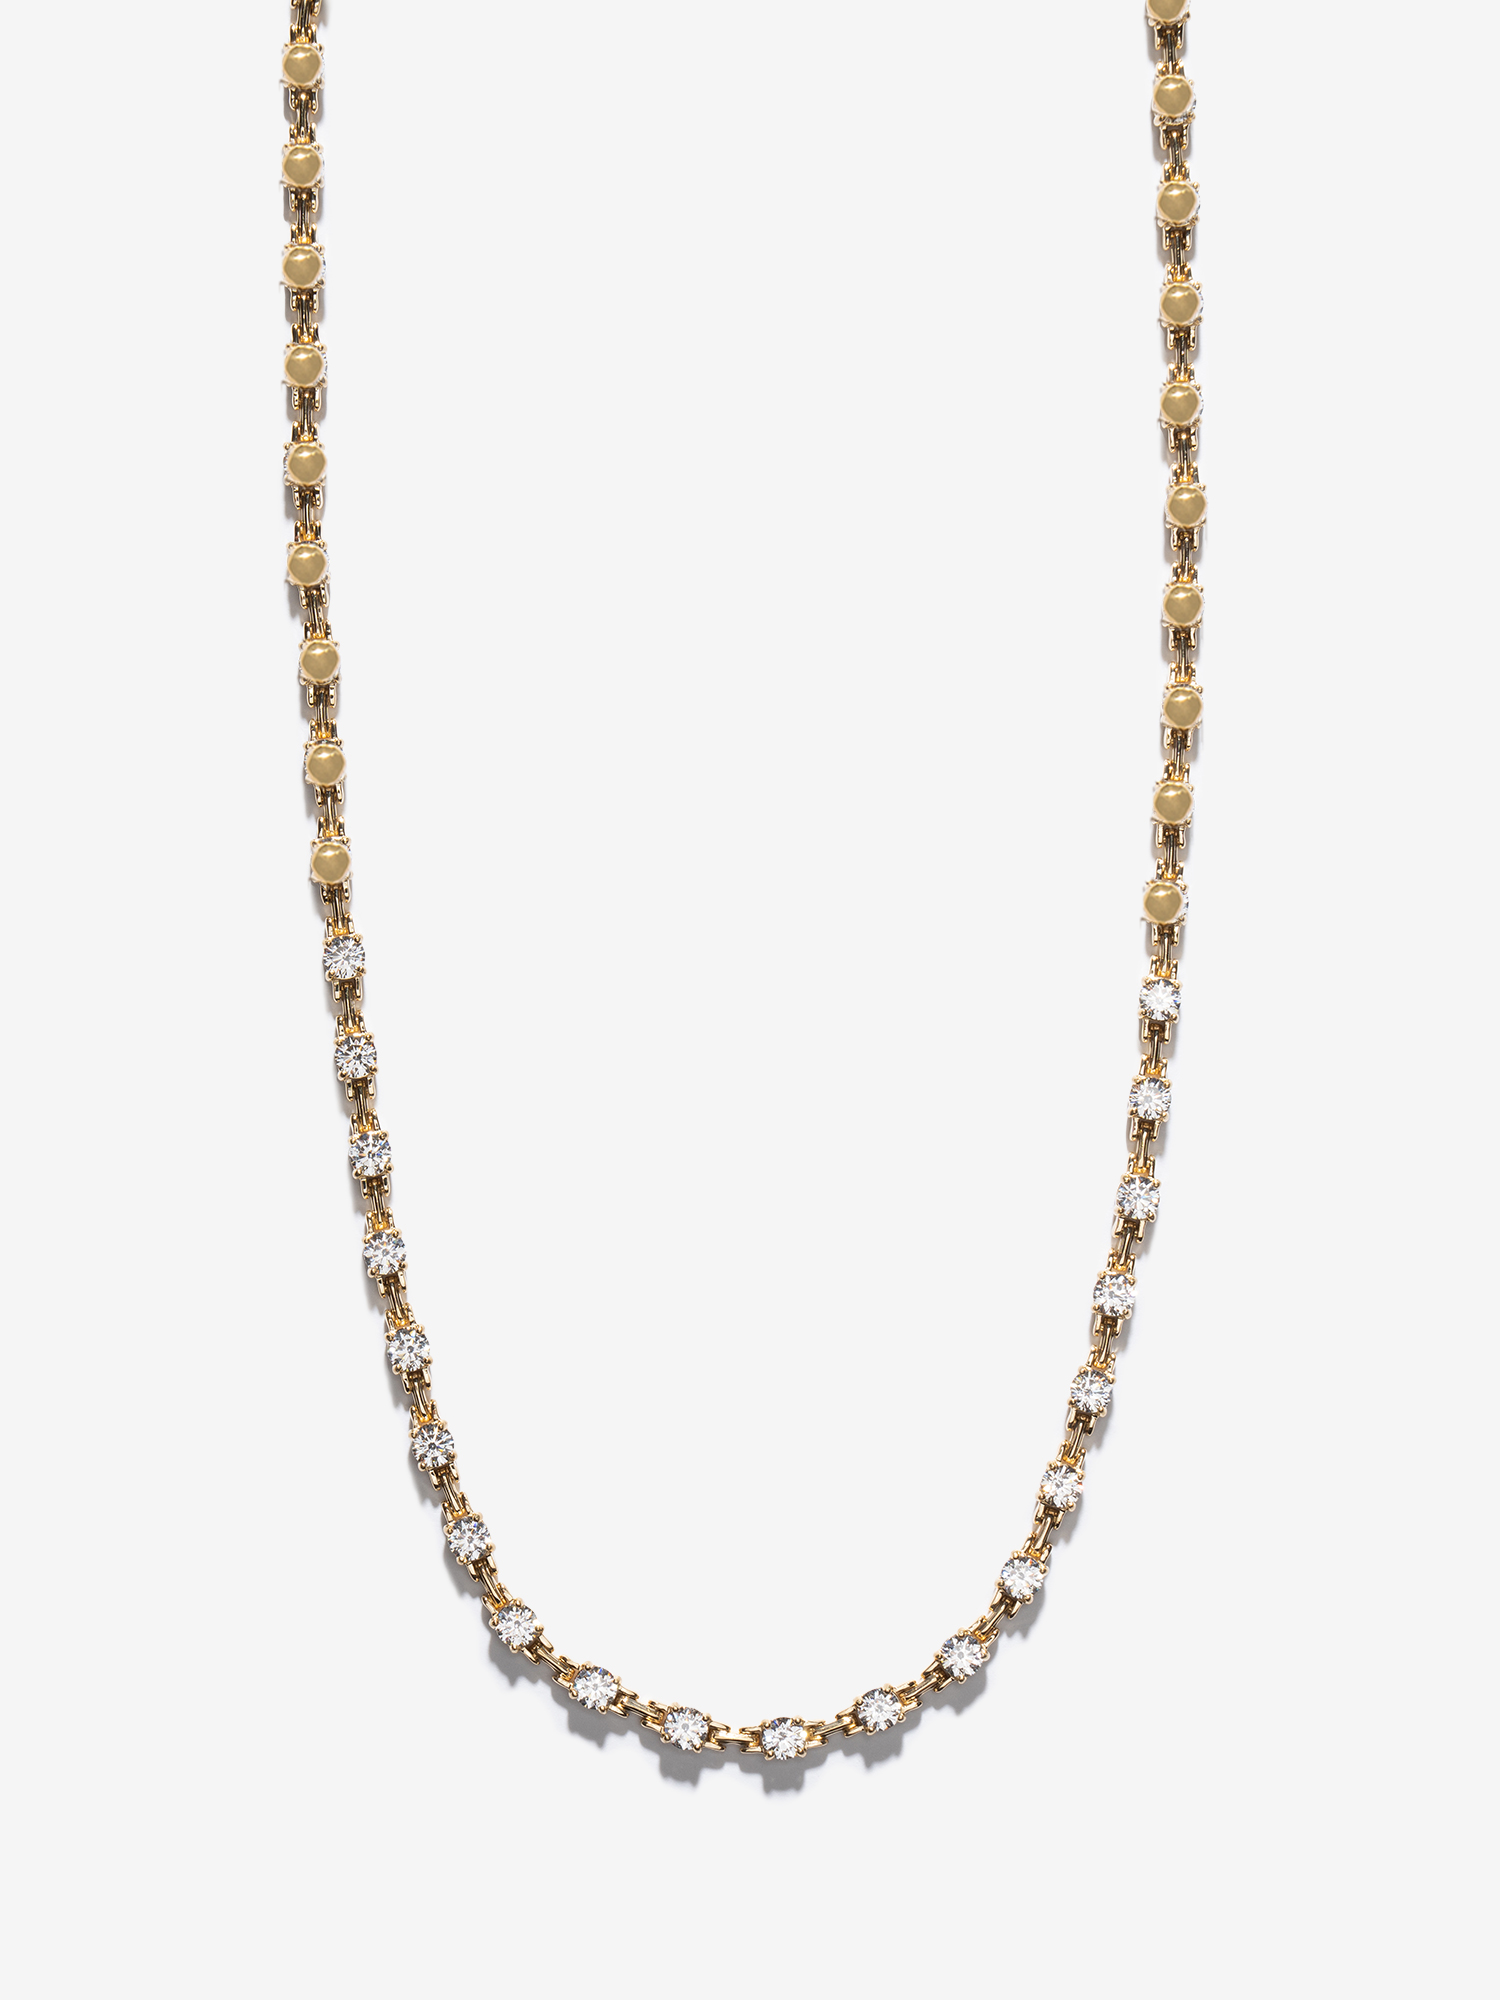 Pirouette Large Front Diamond Necklace